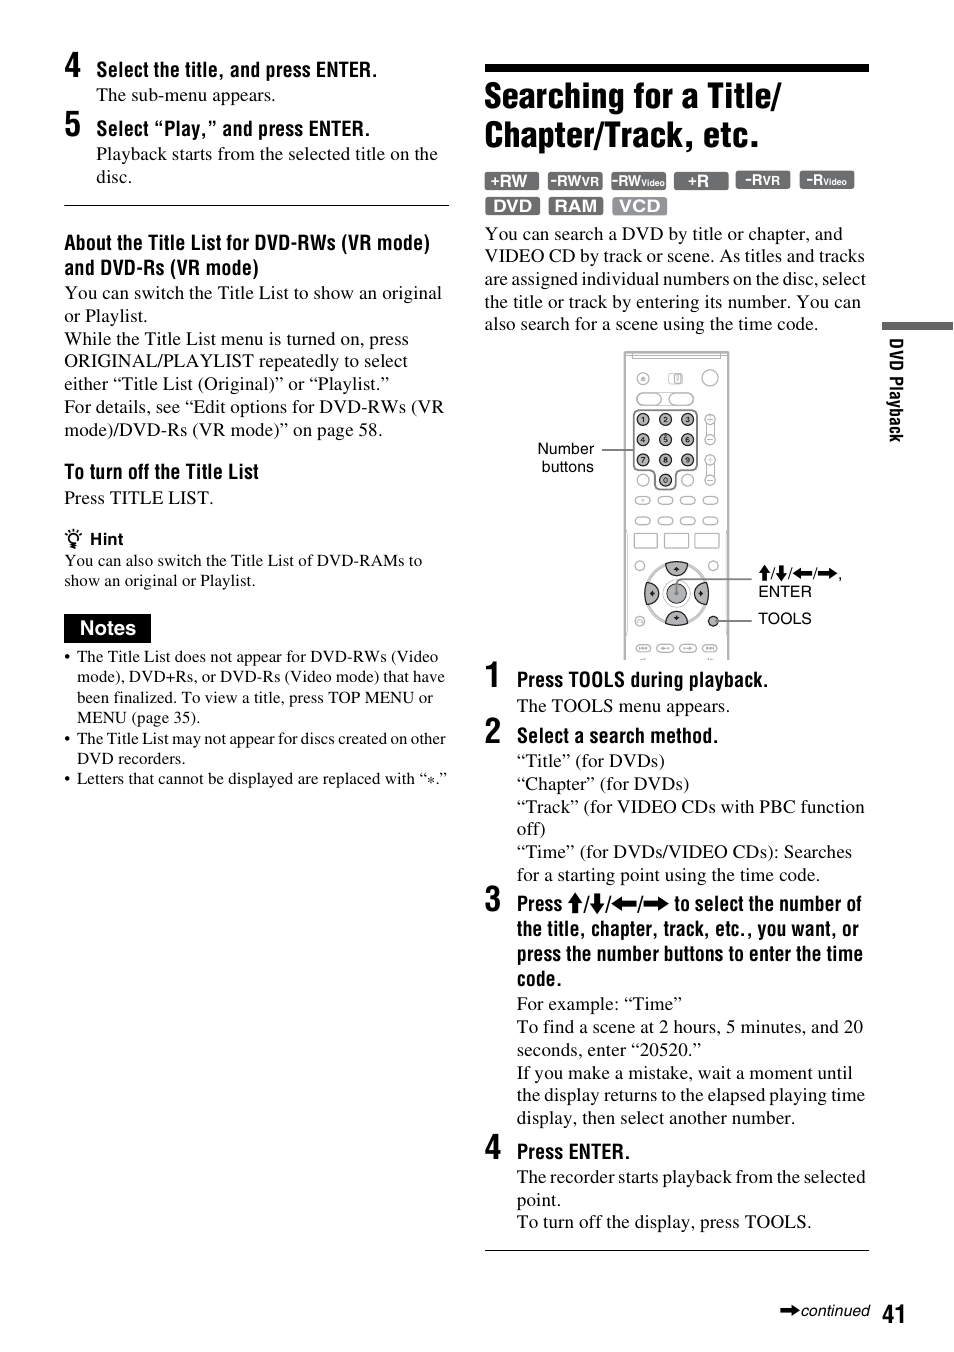 Searching for a title/ chapter/track, etc, Searching for a title/chapter/track, etc | Sony RDR-VX521 User Manual | Page 41 / 132